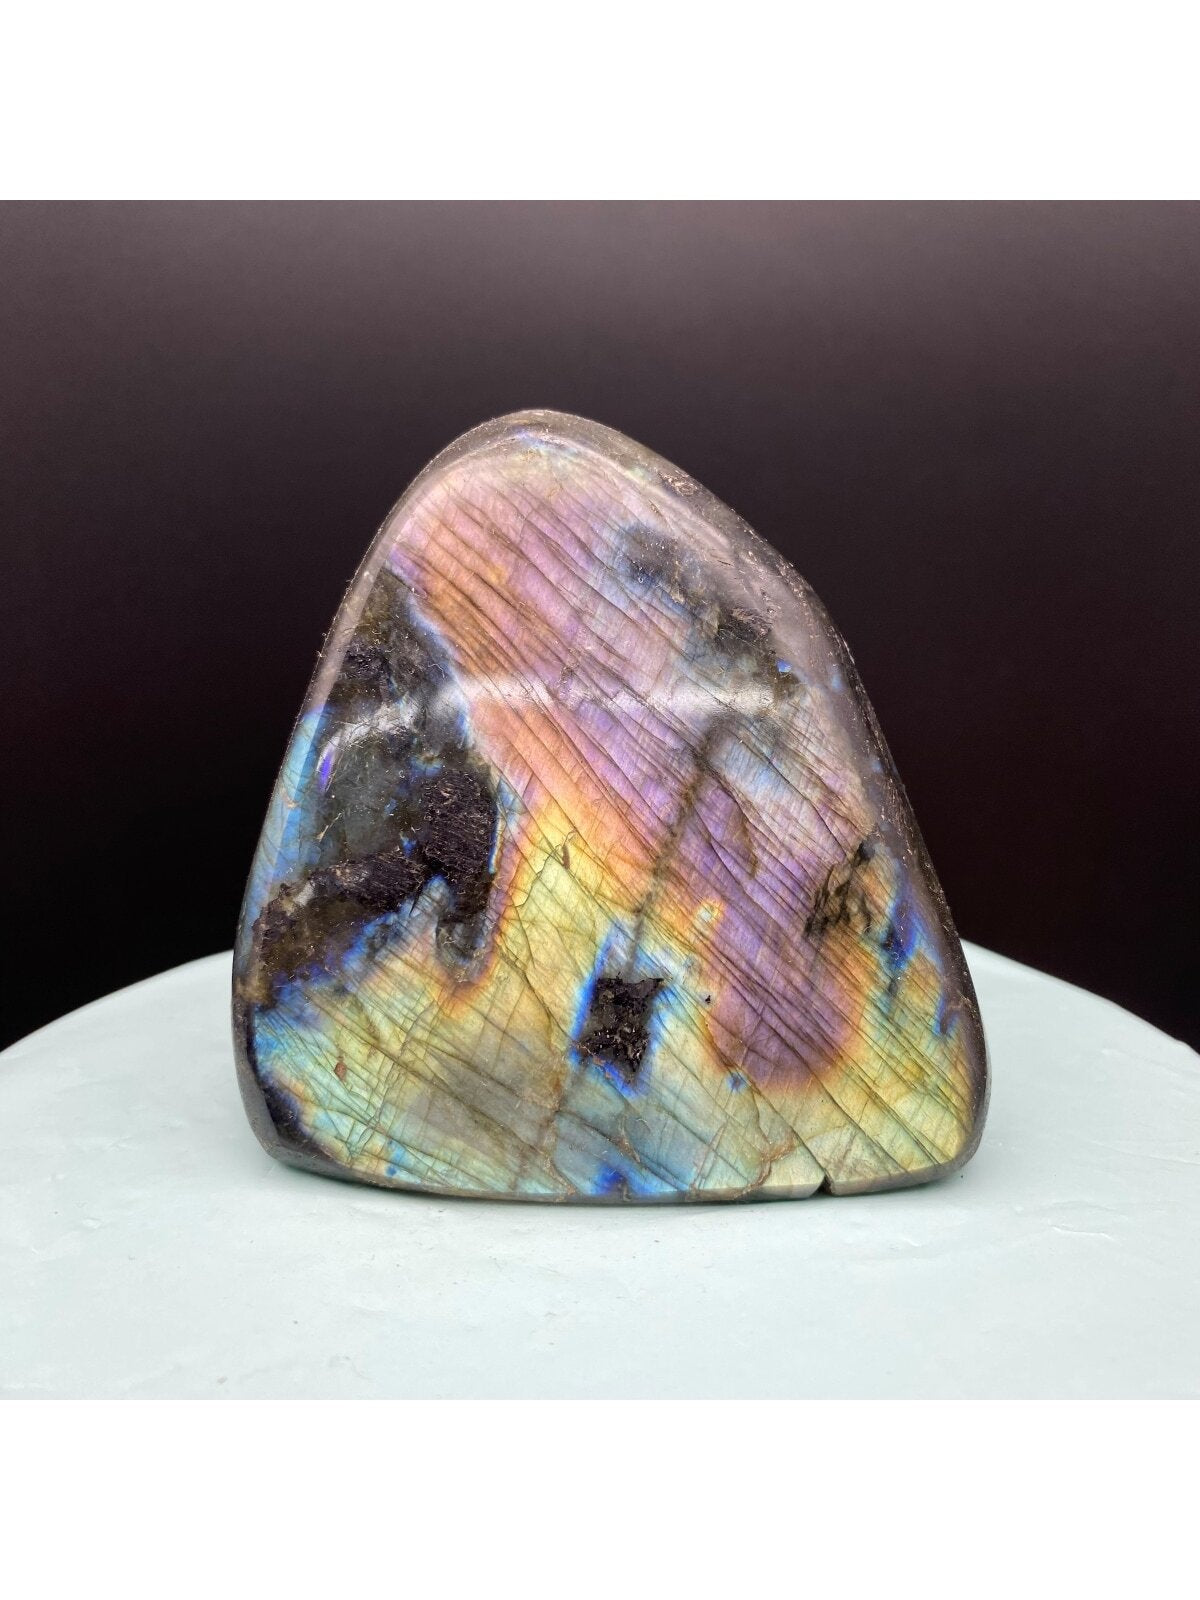 Rainbow Fluorite Specimen Display Piece, A Magical Spiritual Gift For Any Occasion 1pc